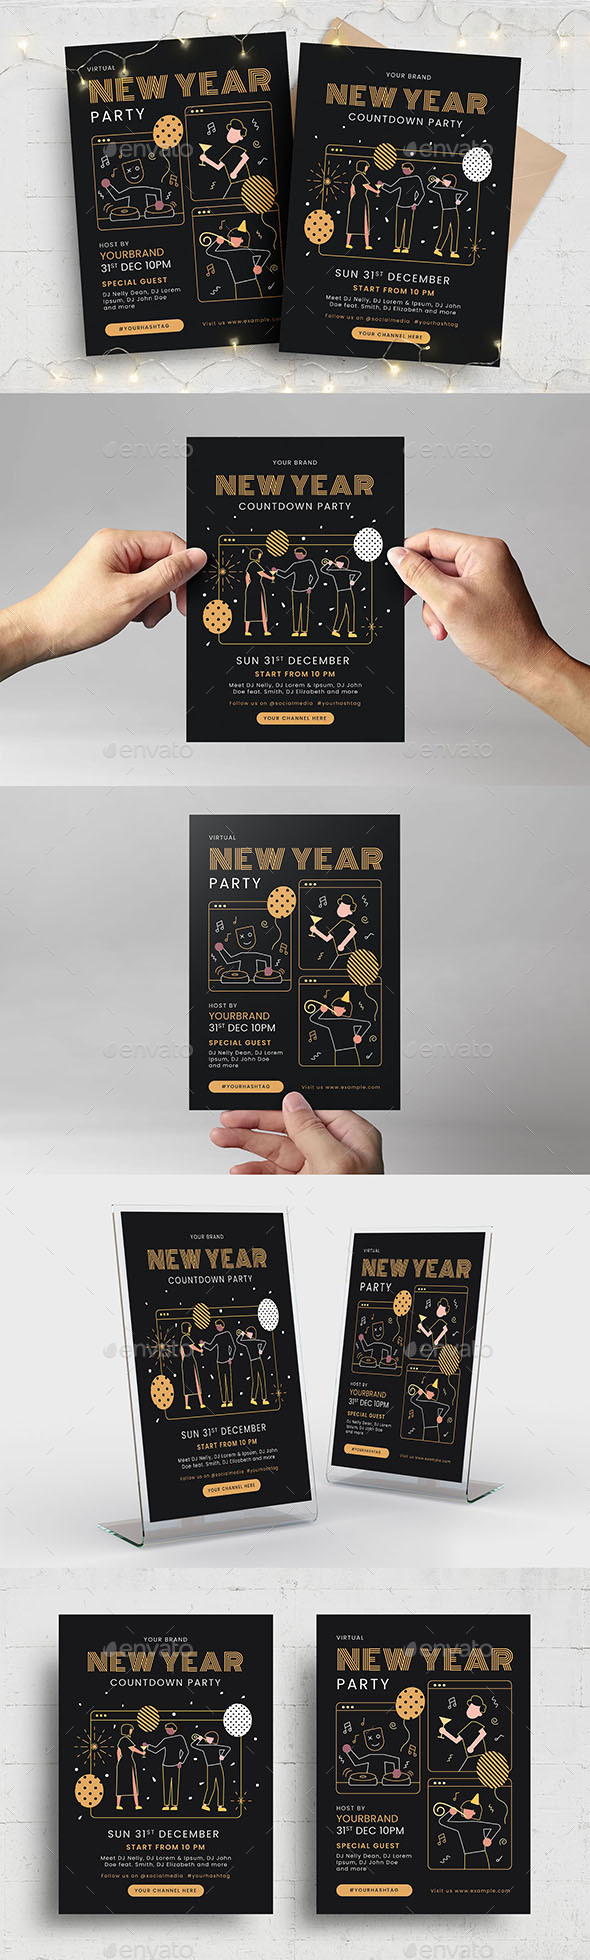 NYE Virtual Office Party Flyer